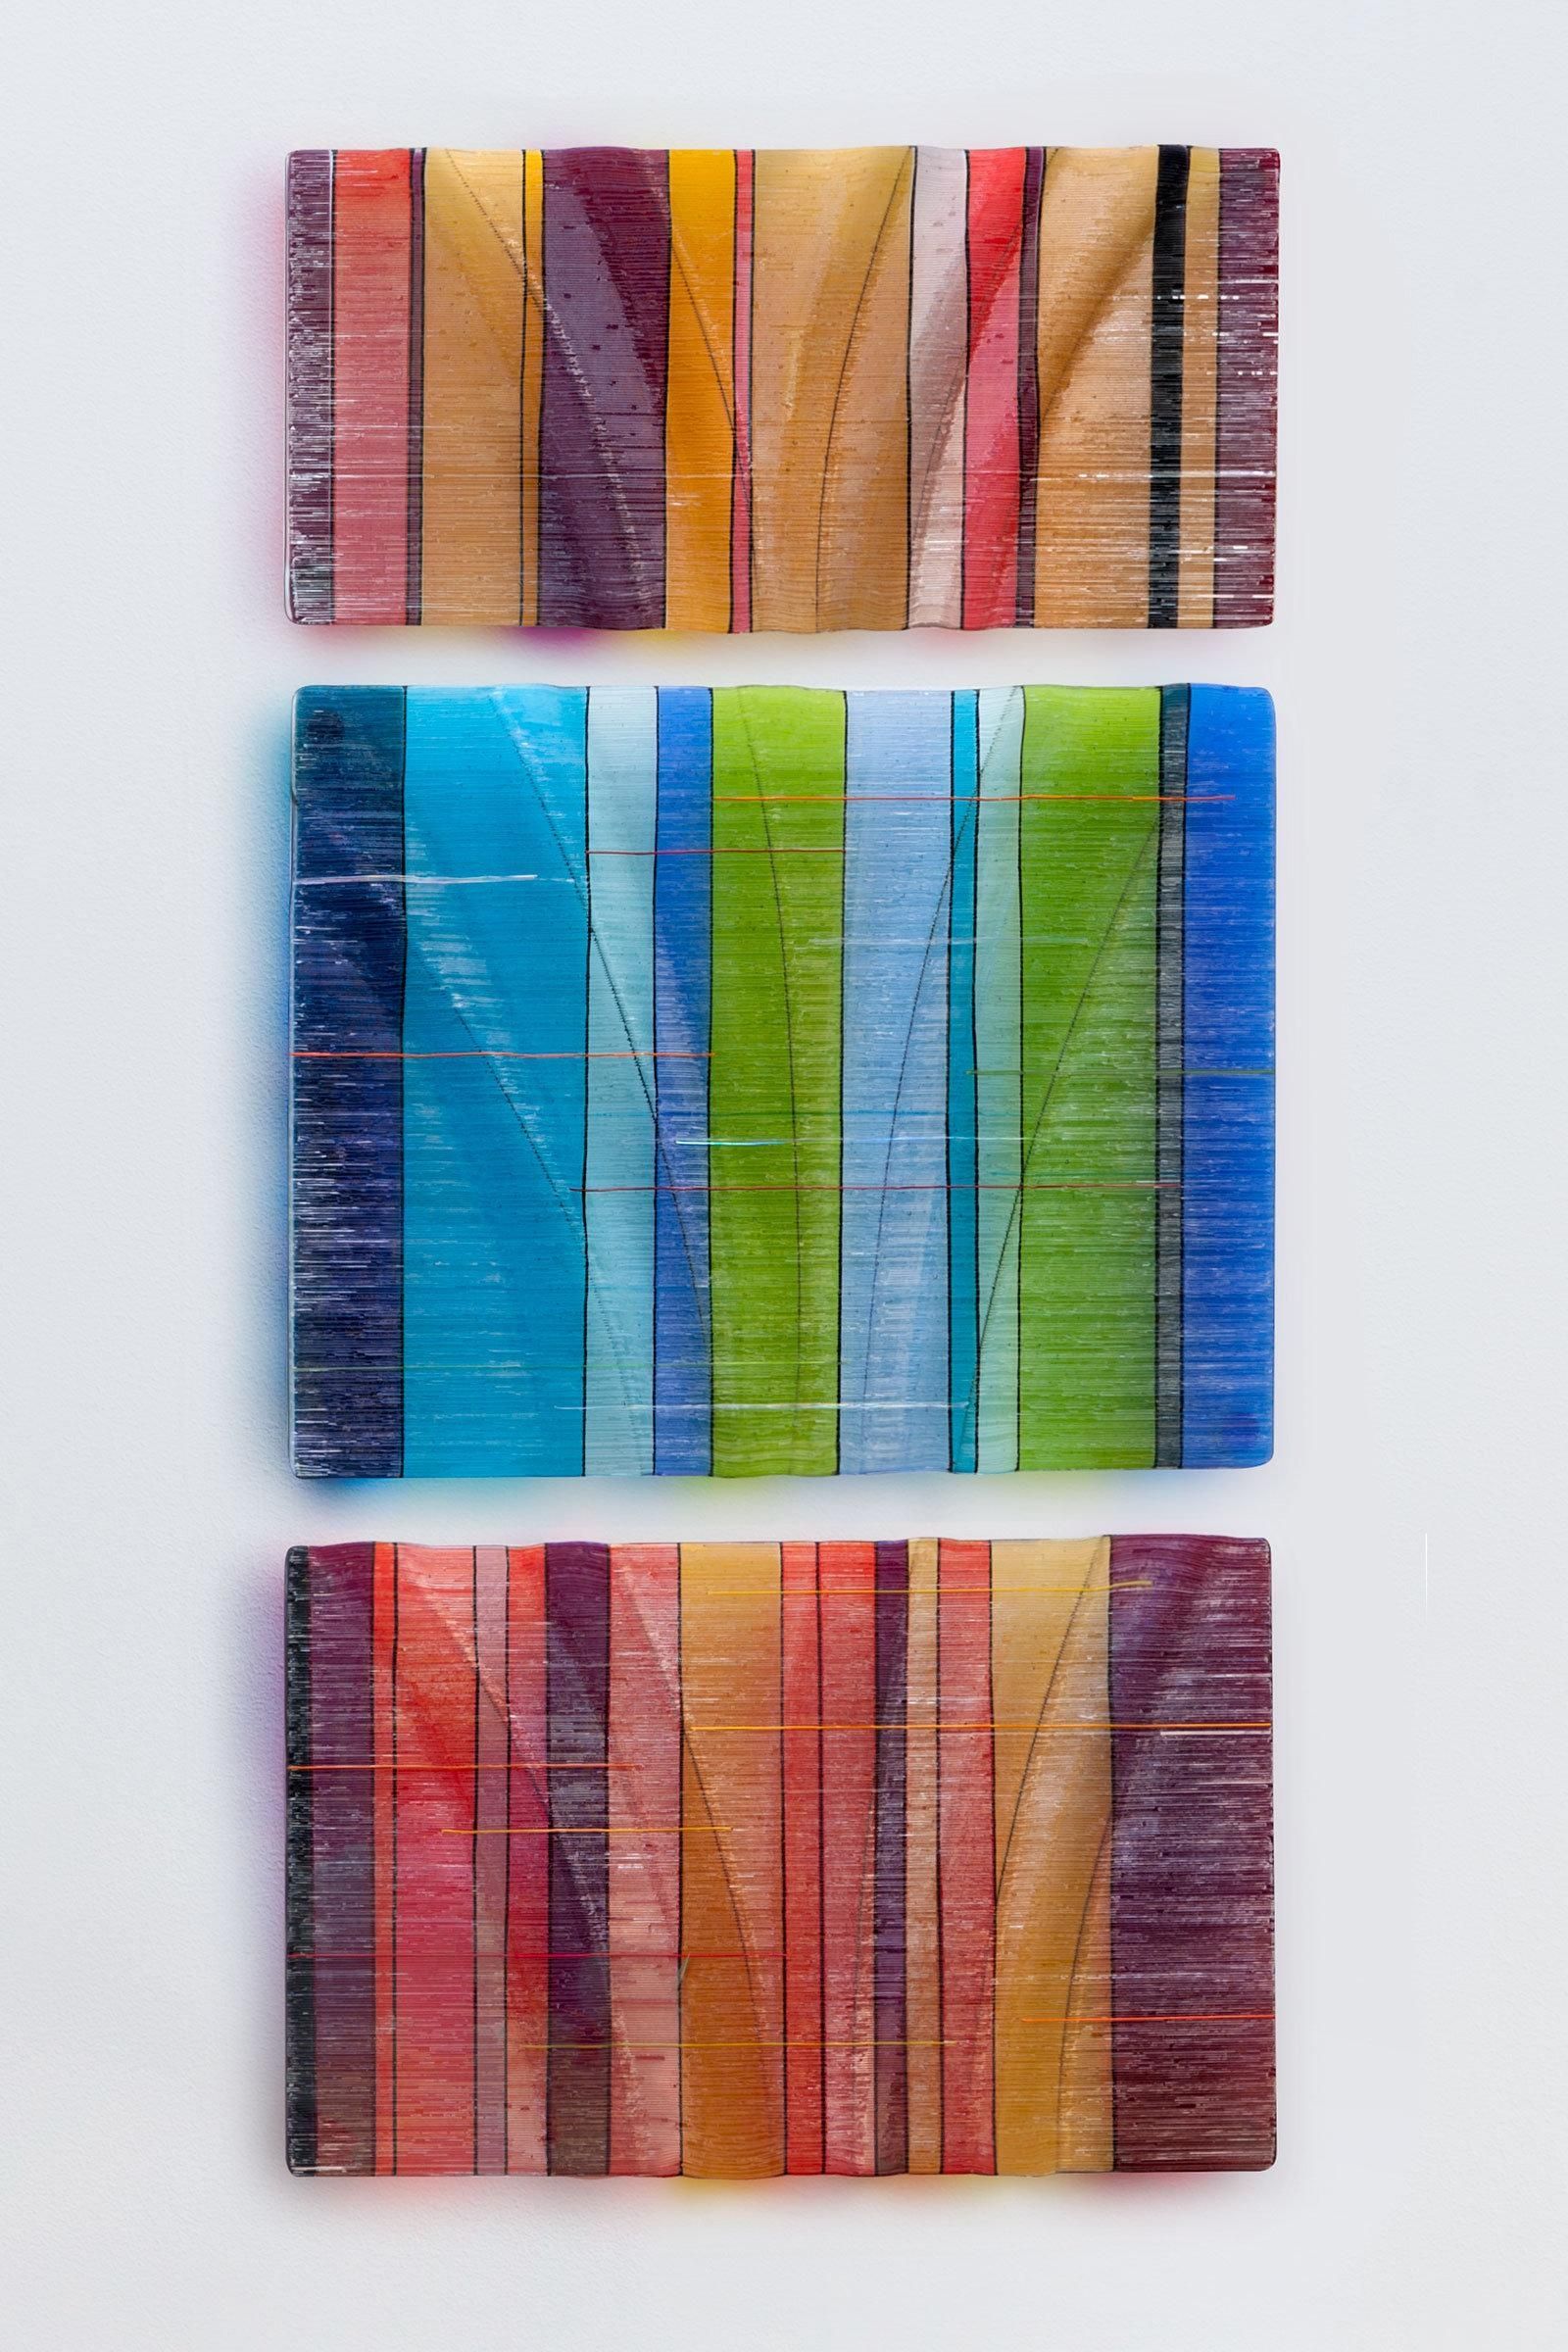 Glass Wall Artnorth American Artists | Artful Home Pertaining To Large Fused Glass Wall Art (View 4 of 20)